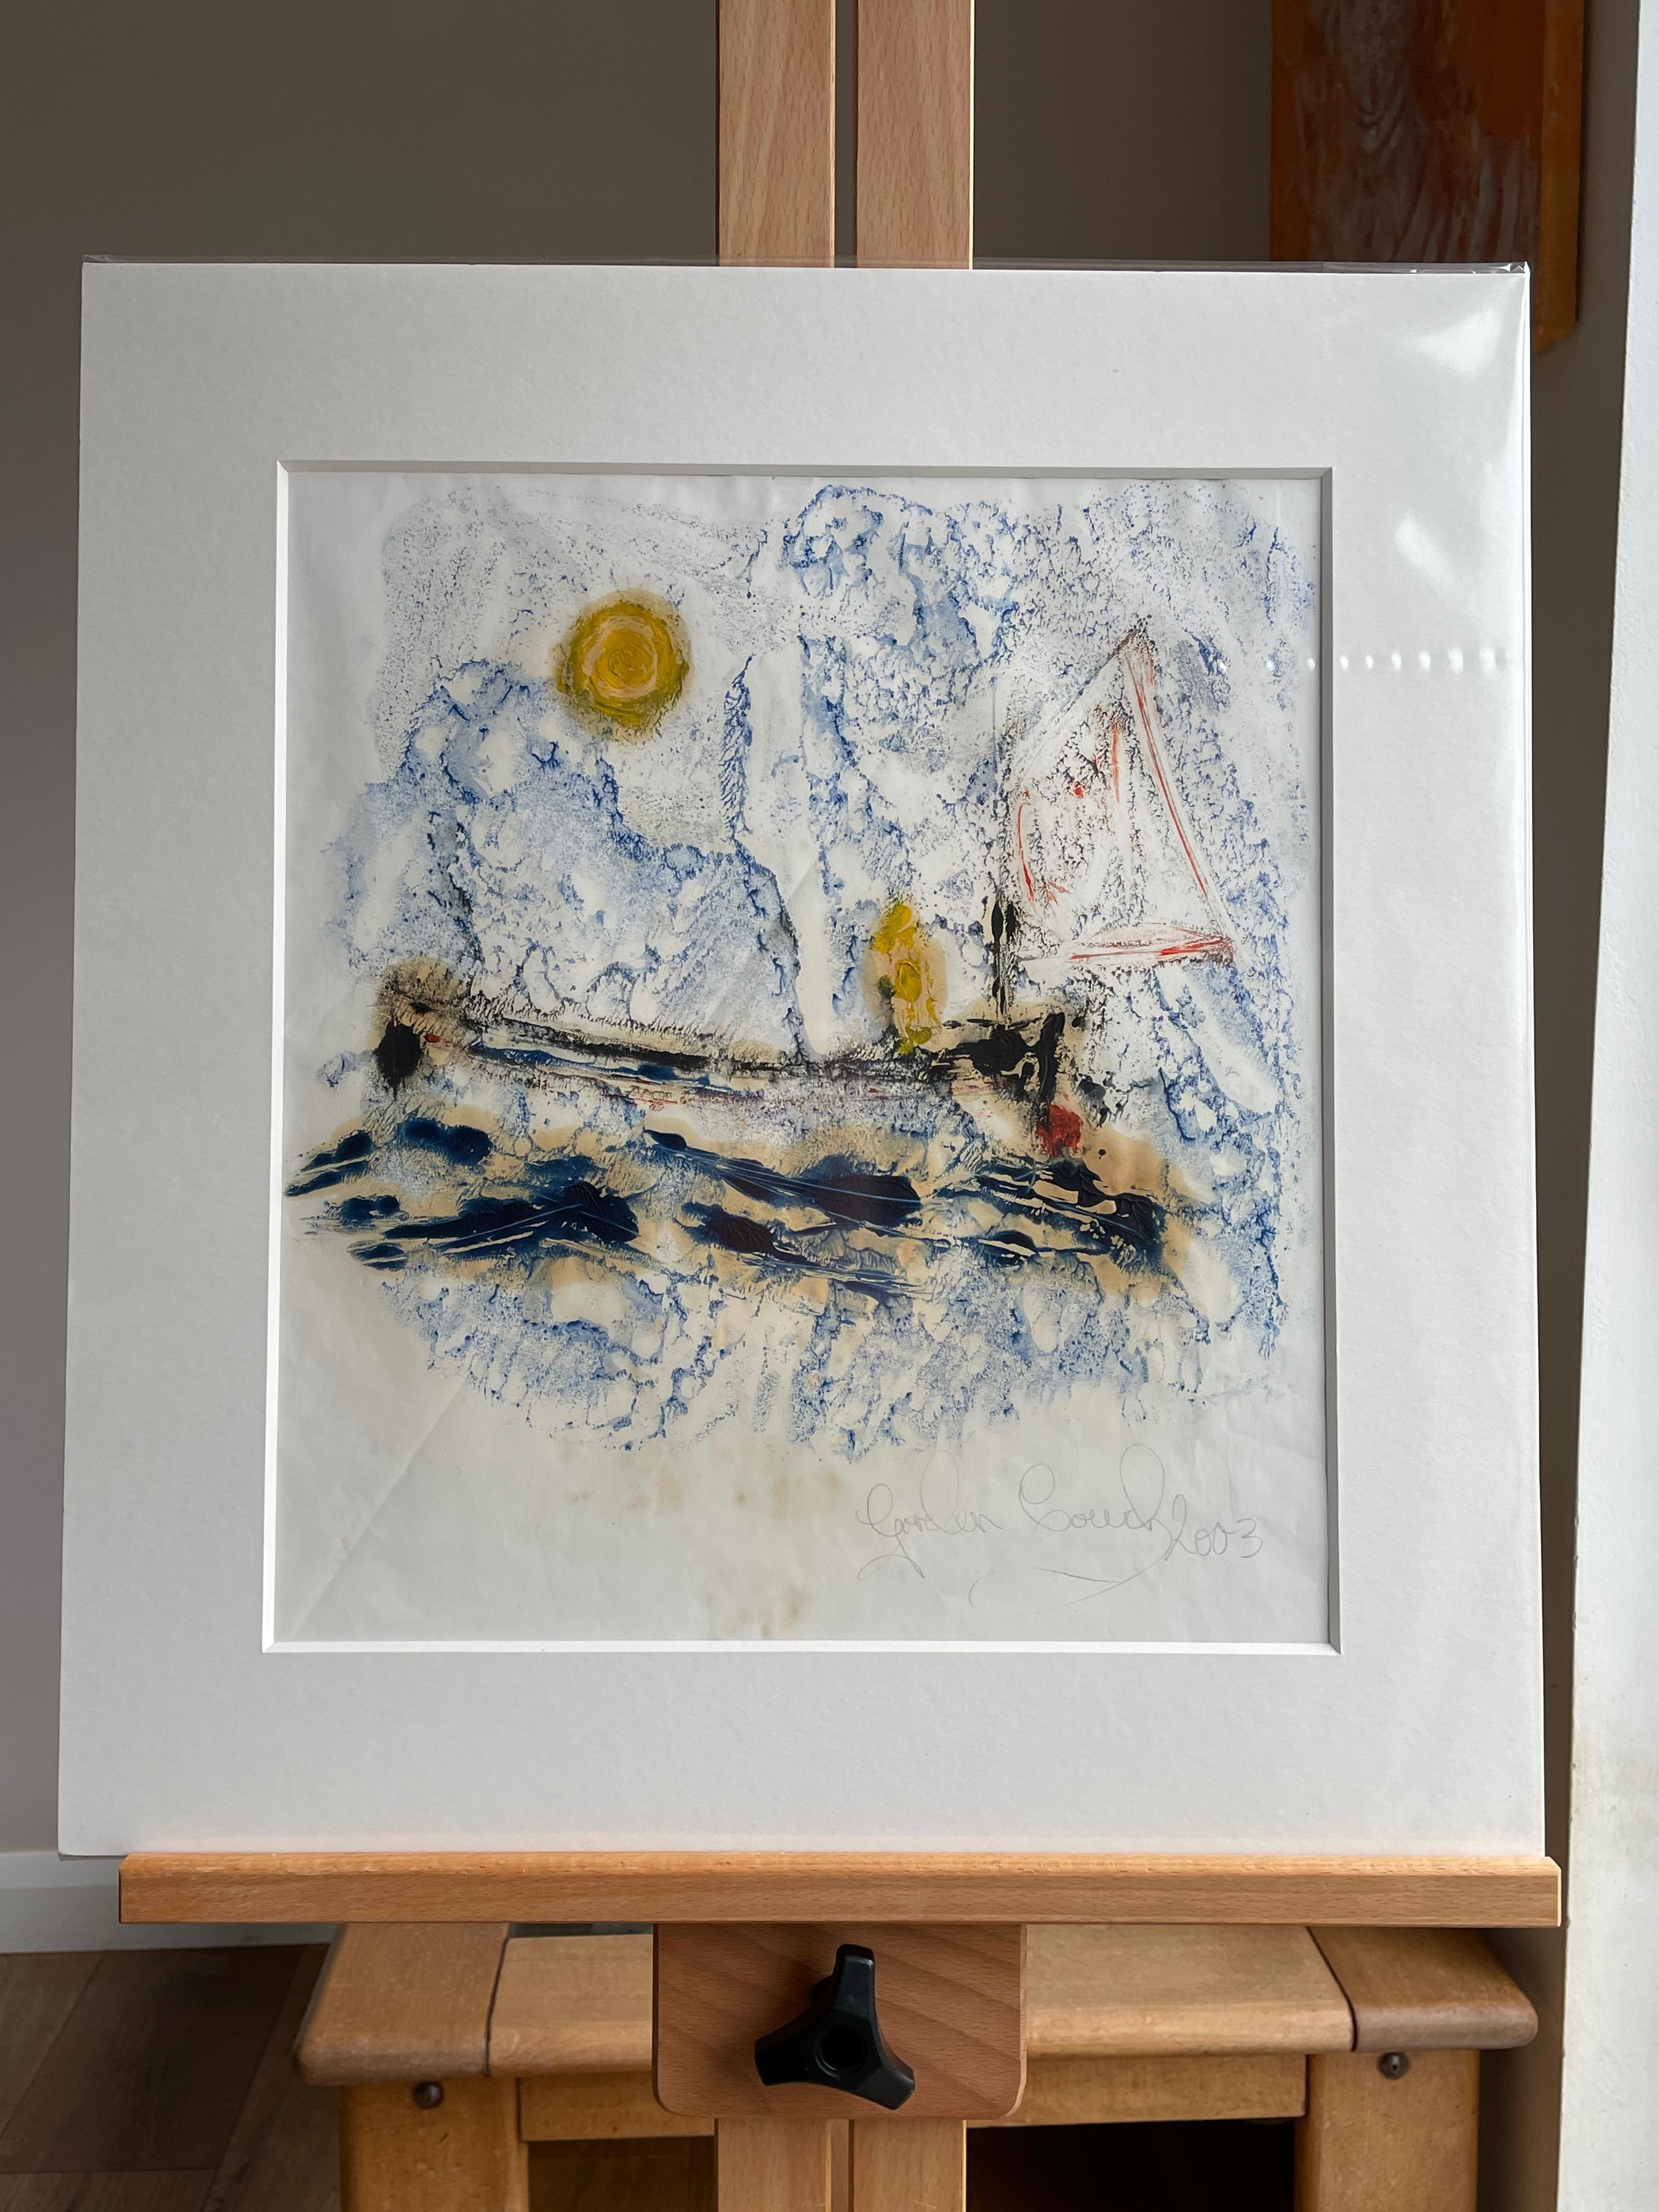 Abstract expressionist seascape on paper. This piece is one of a series of works created under the guidance of great English artist Sir Terry Frost. The influence of Frost is clear and here it melds beautifully with Couch’s own style.

Newly